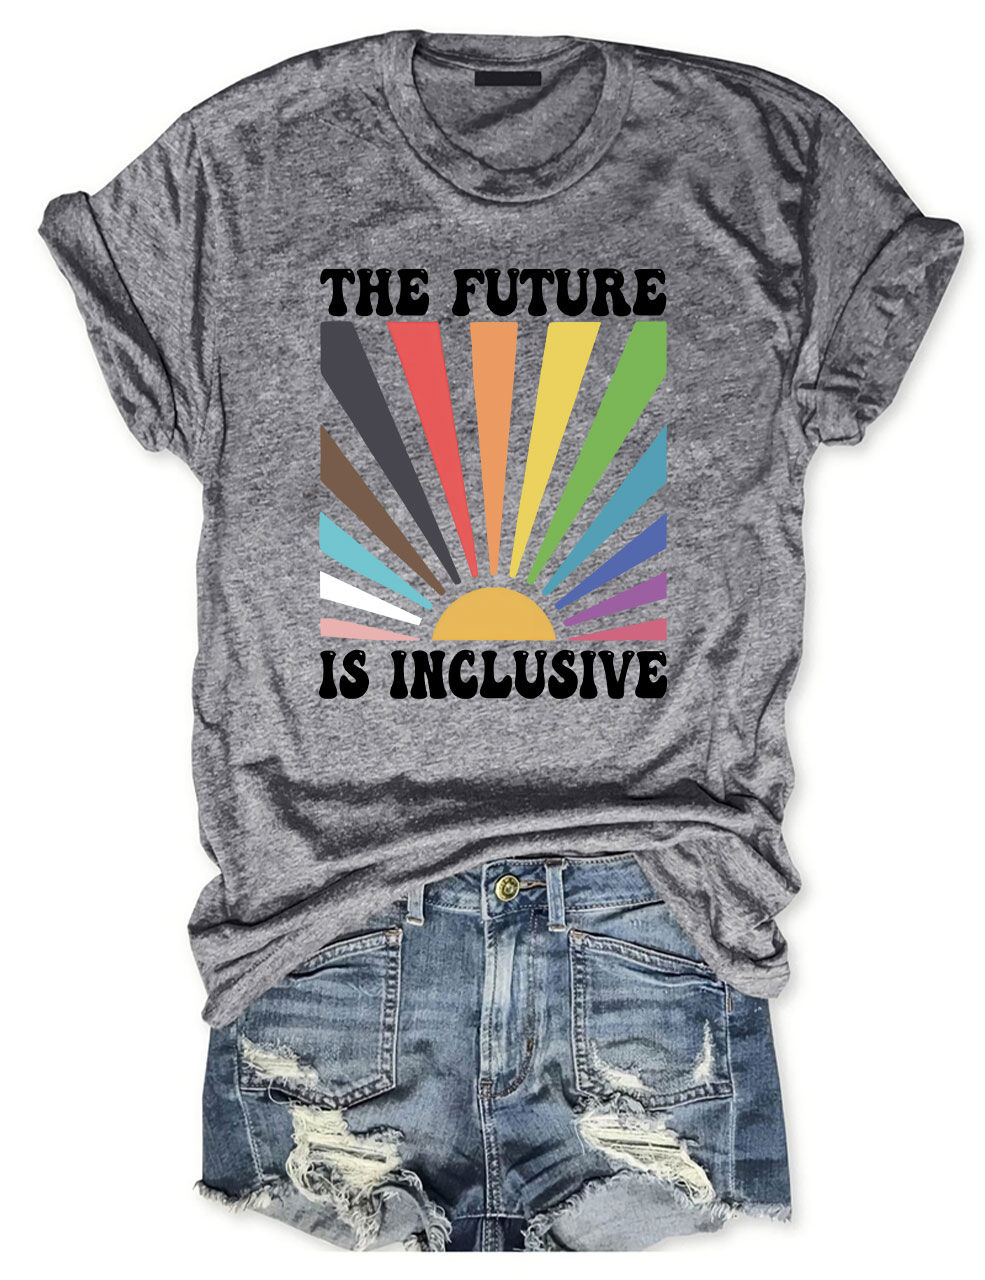 The Future is Inclusive T-shirt